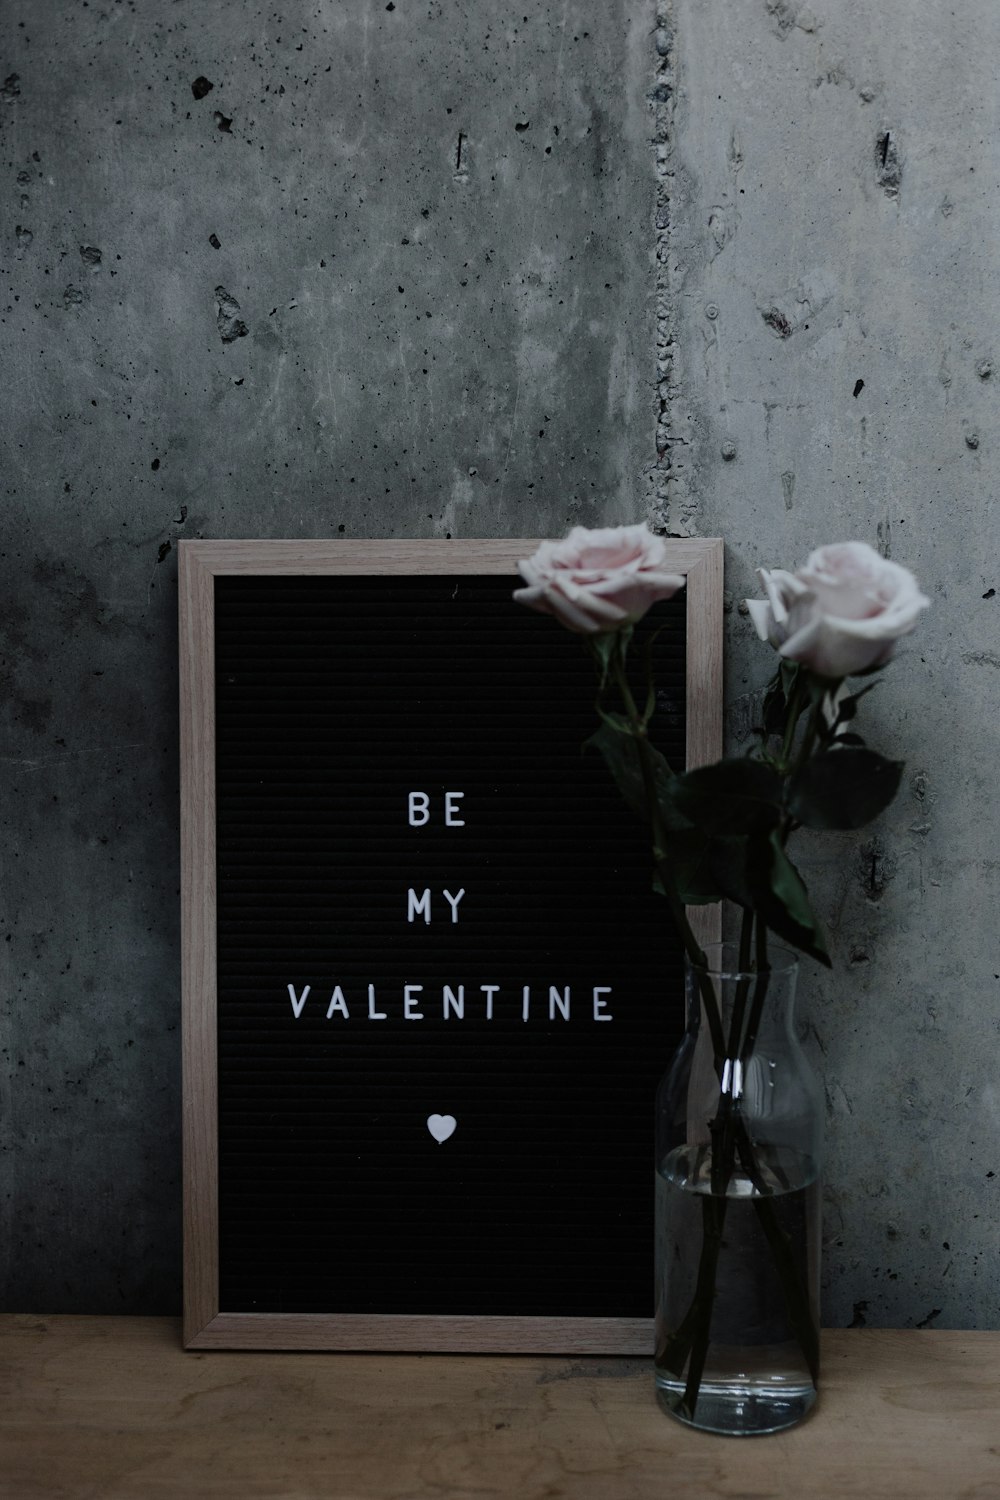 two white rose flowers in vase, with a sign that says Be My Valentine 